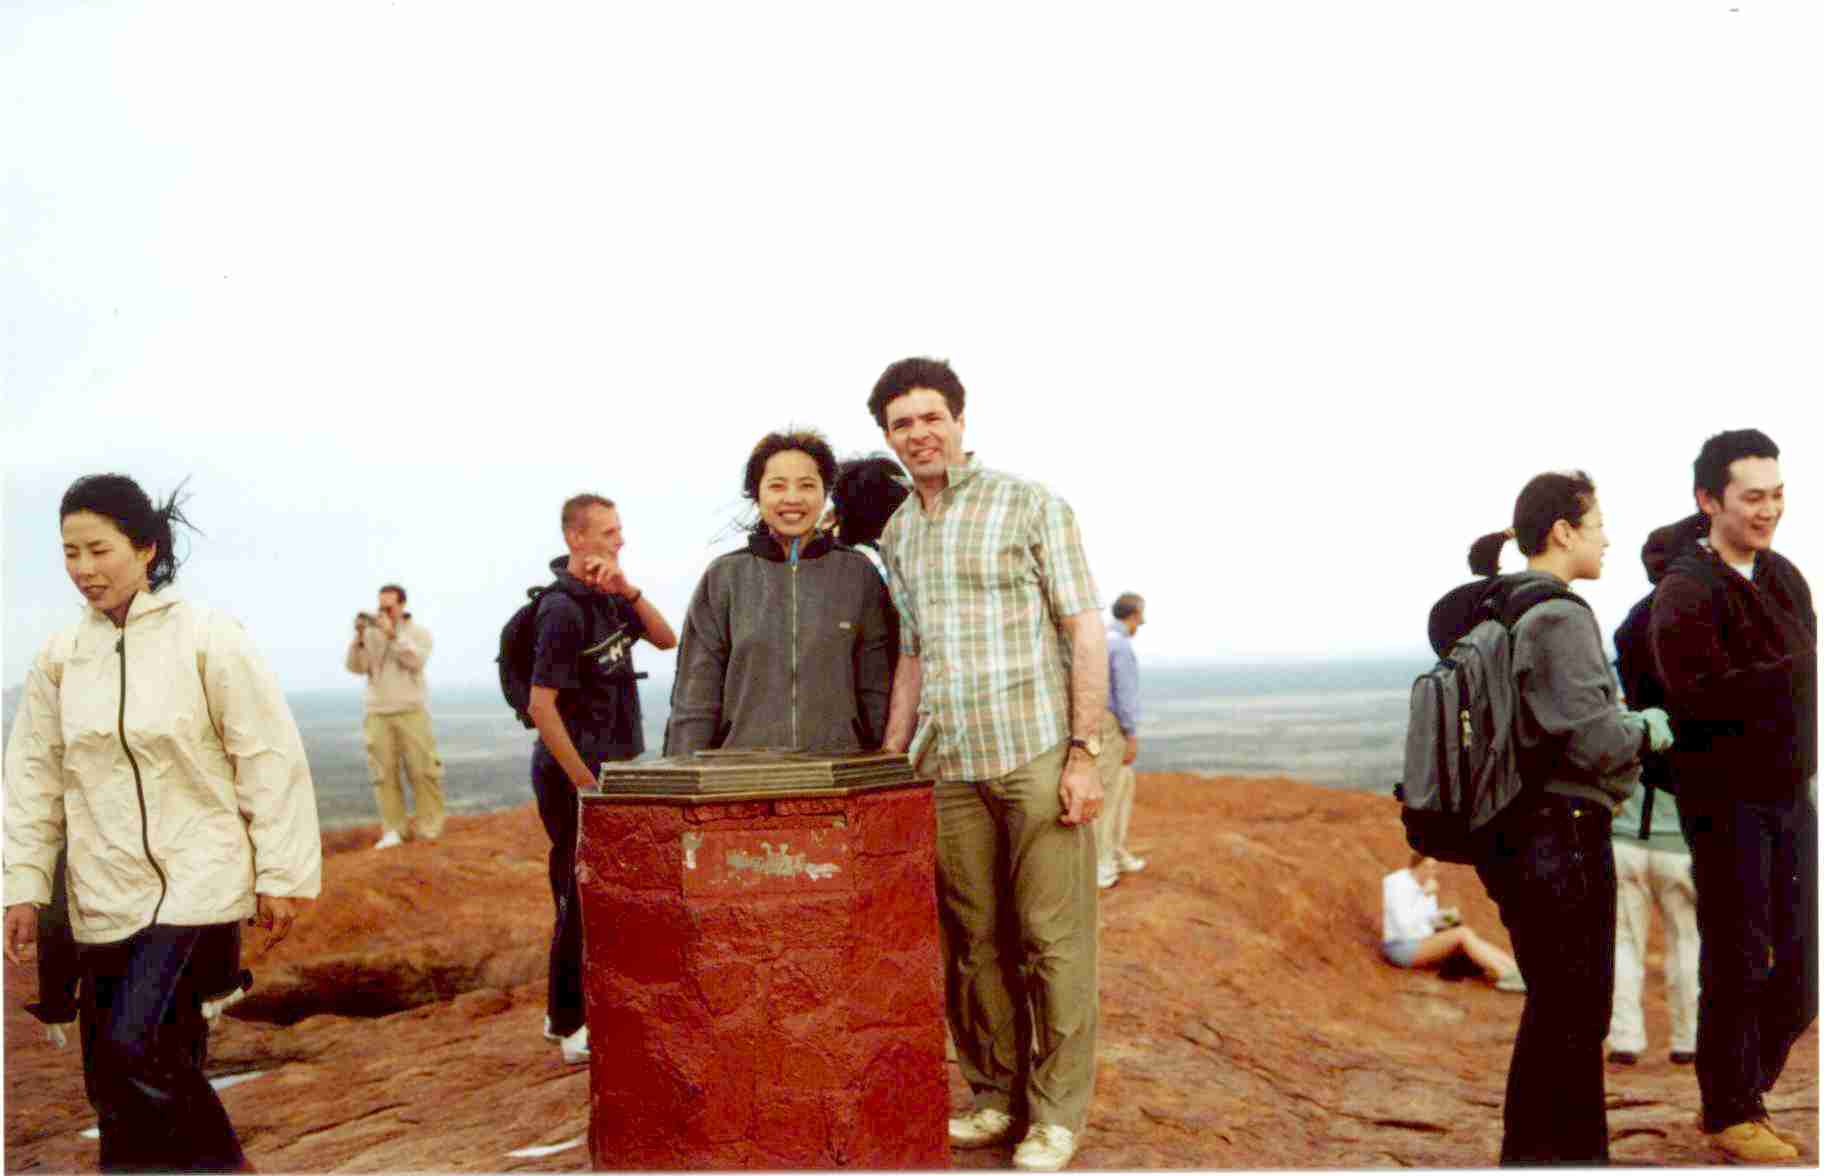 View at top of Ayers rock